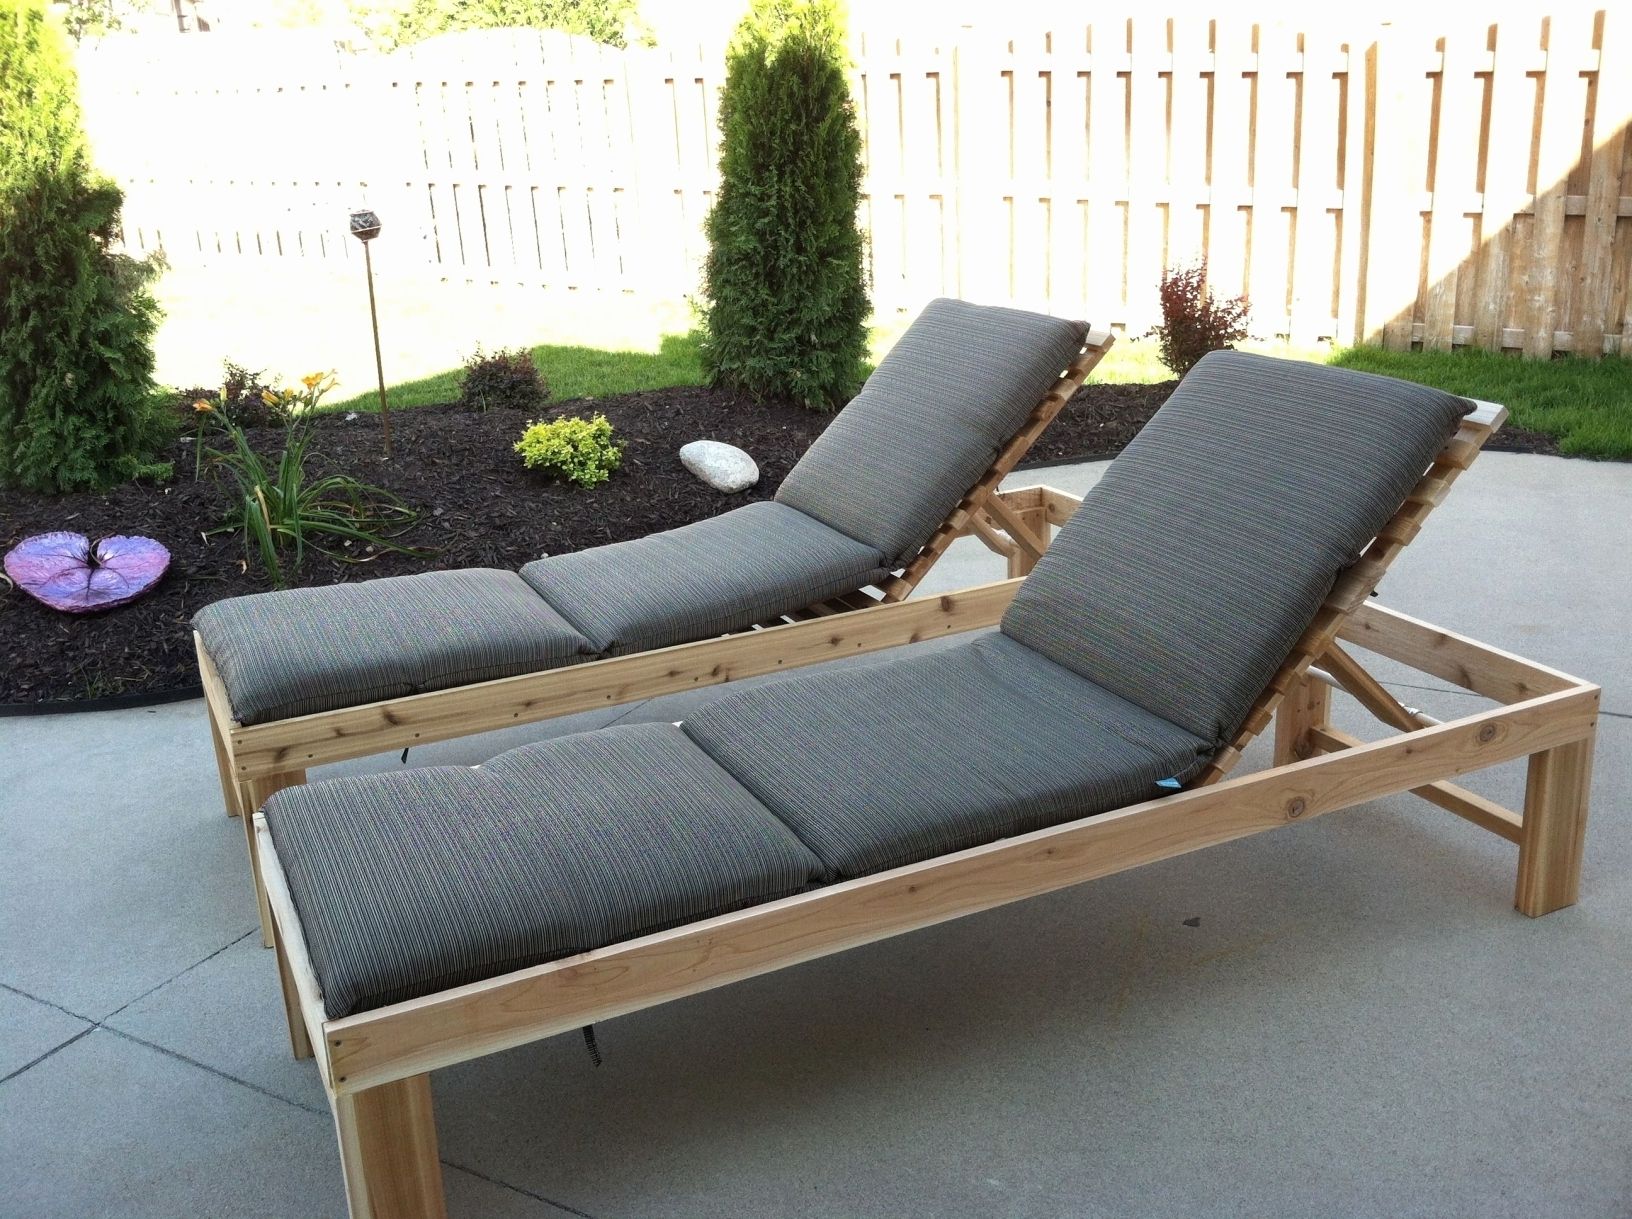 Preferred Diy Outdoor Chaise Lounge Chairs With Beach Chaise Lounge Chairs Amazing Diy Chaise Lounge Diy Outdoor (View 1 of 15)